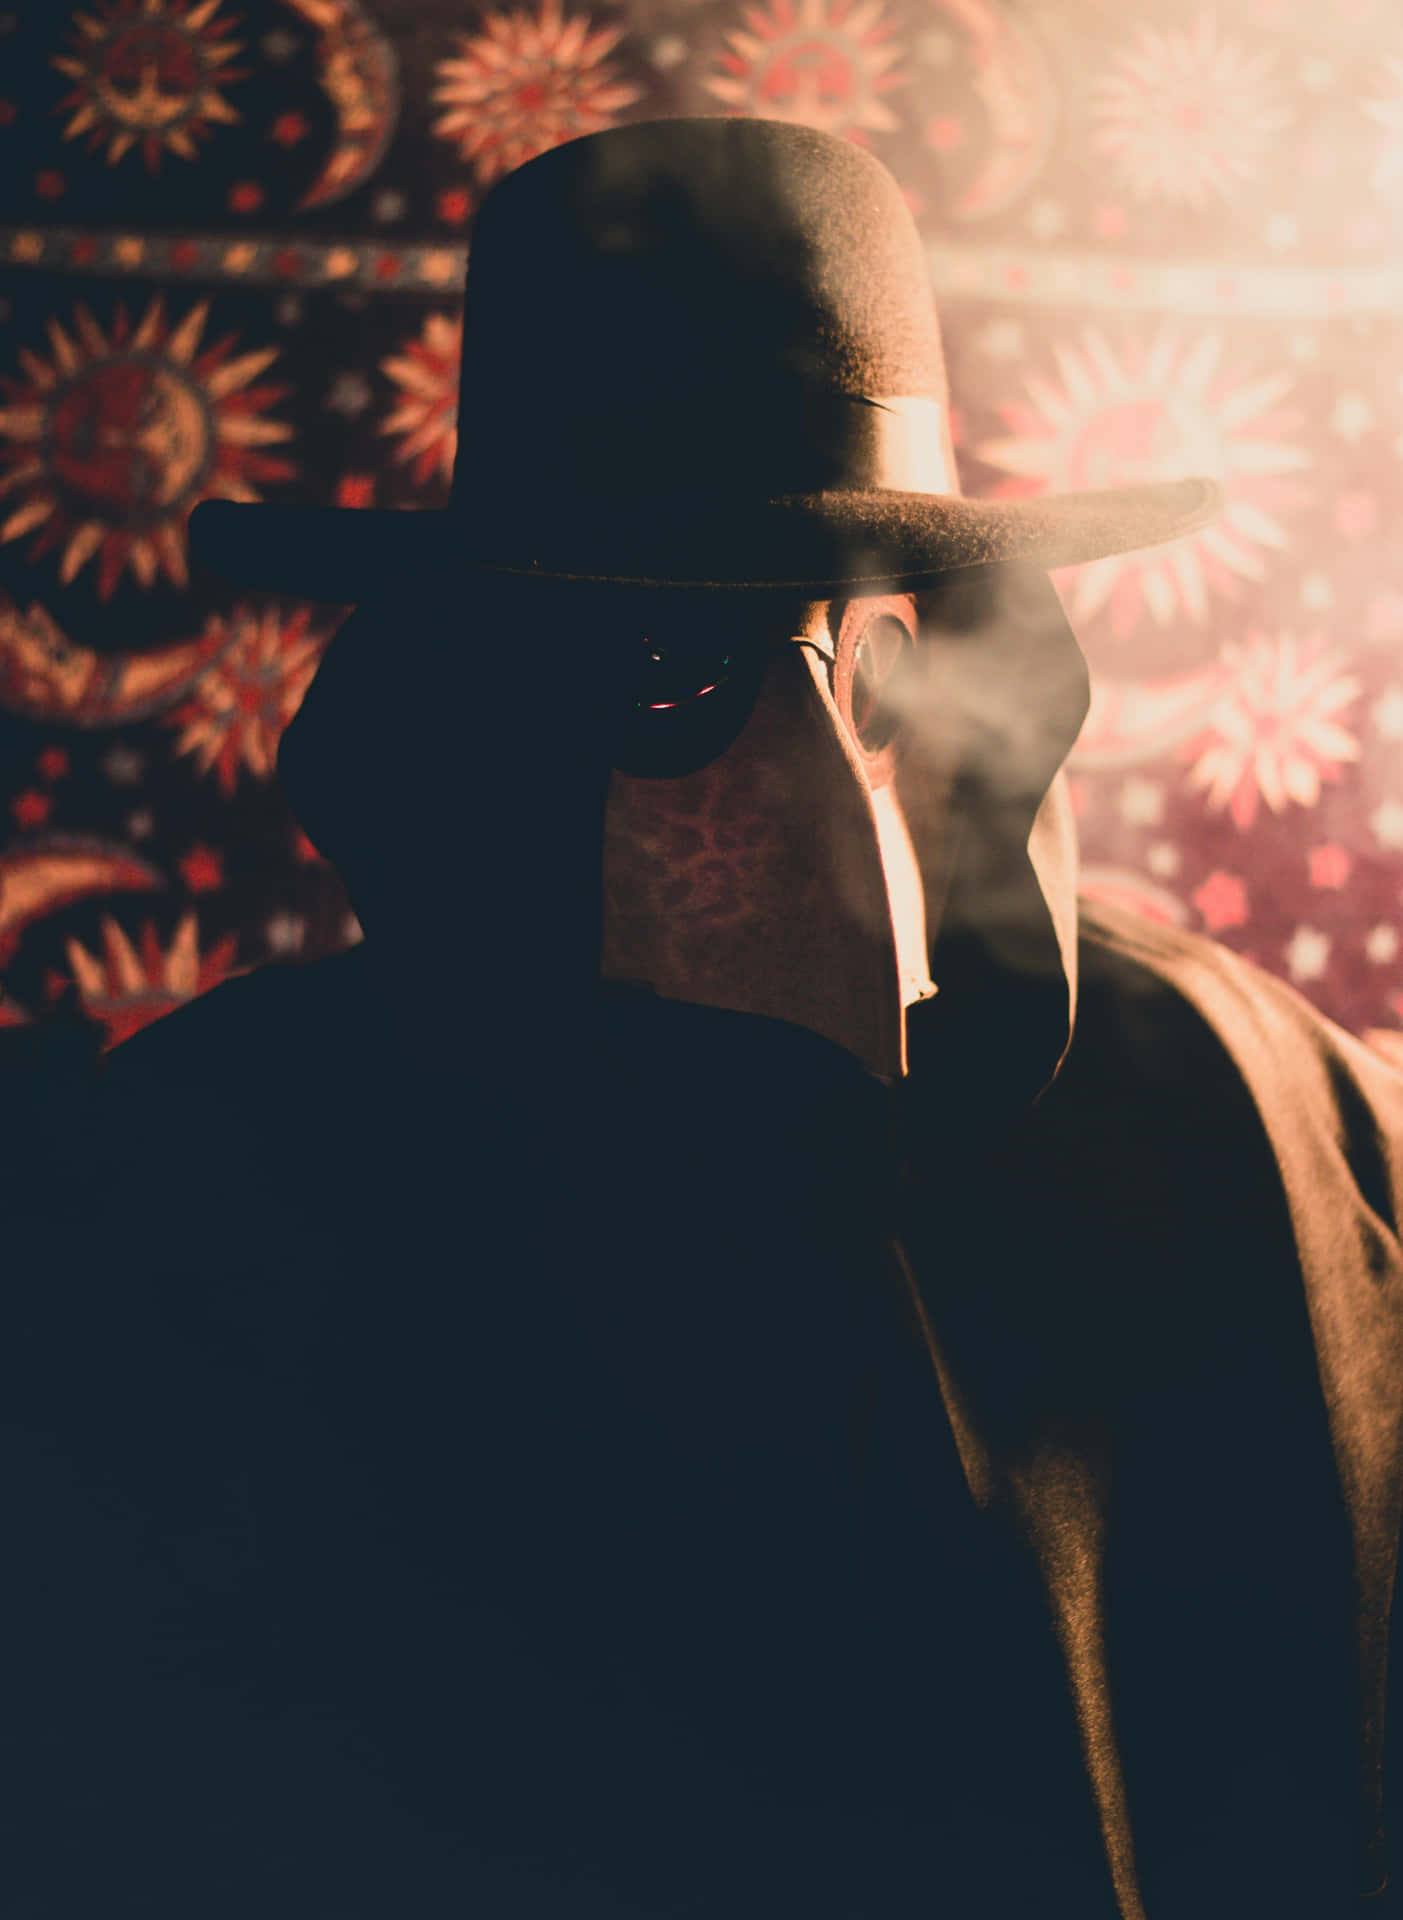 Mysterious Plague Doctor Silhouette